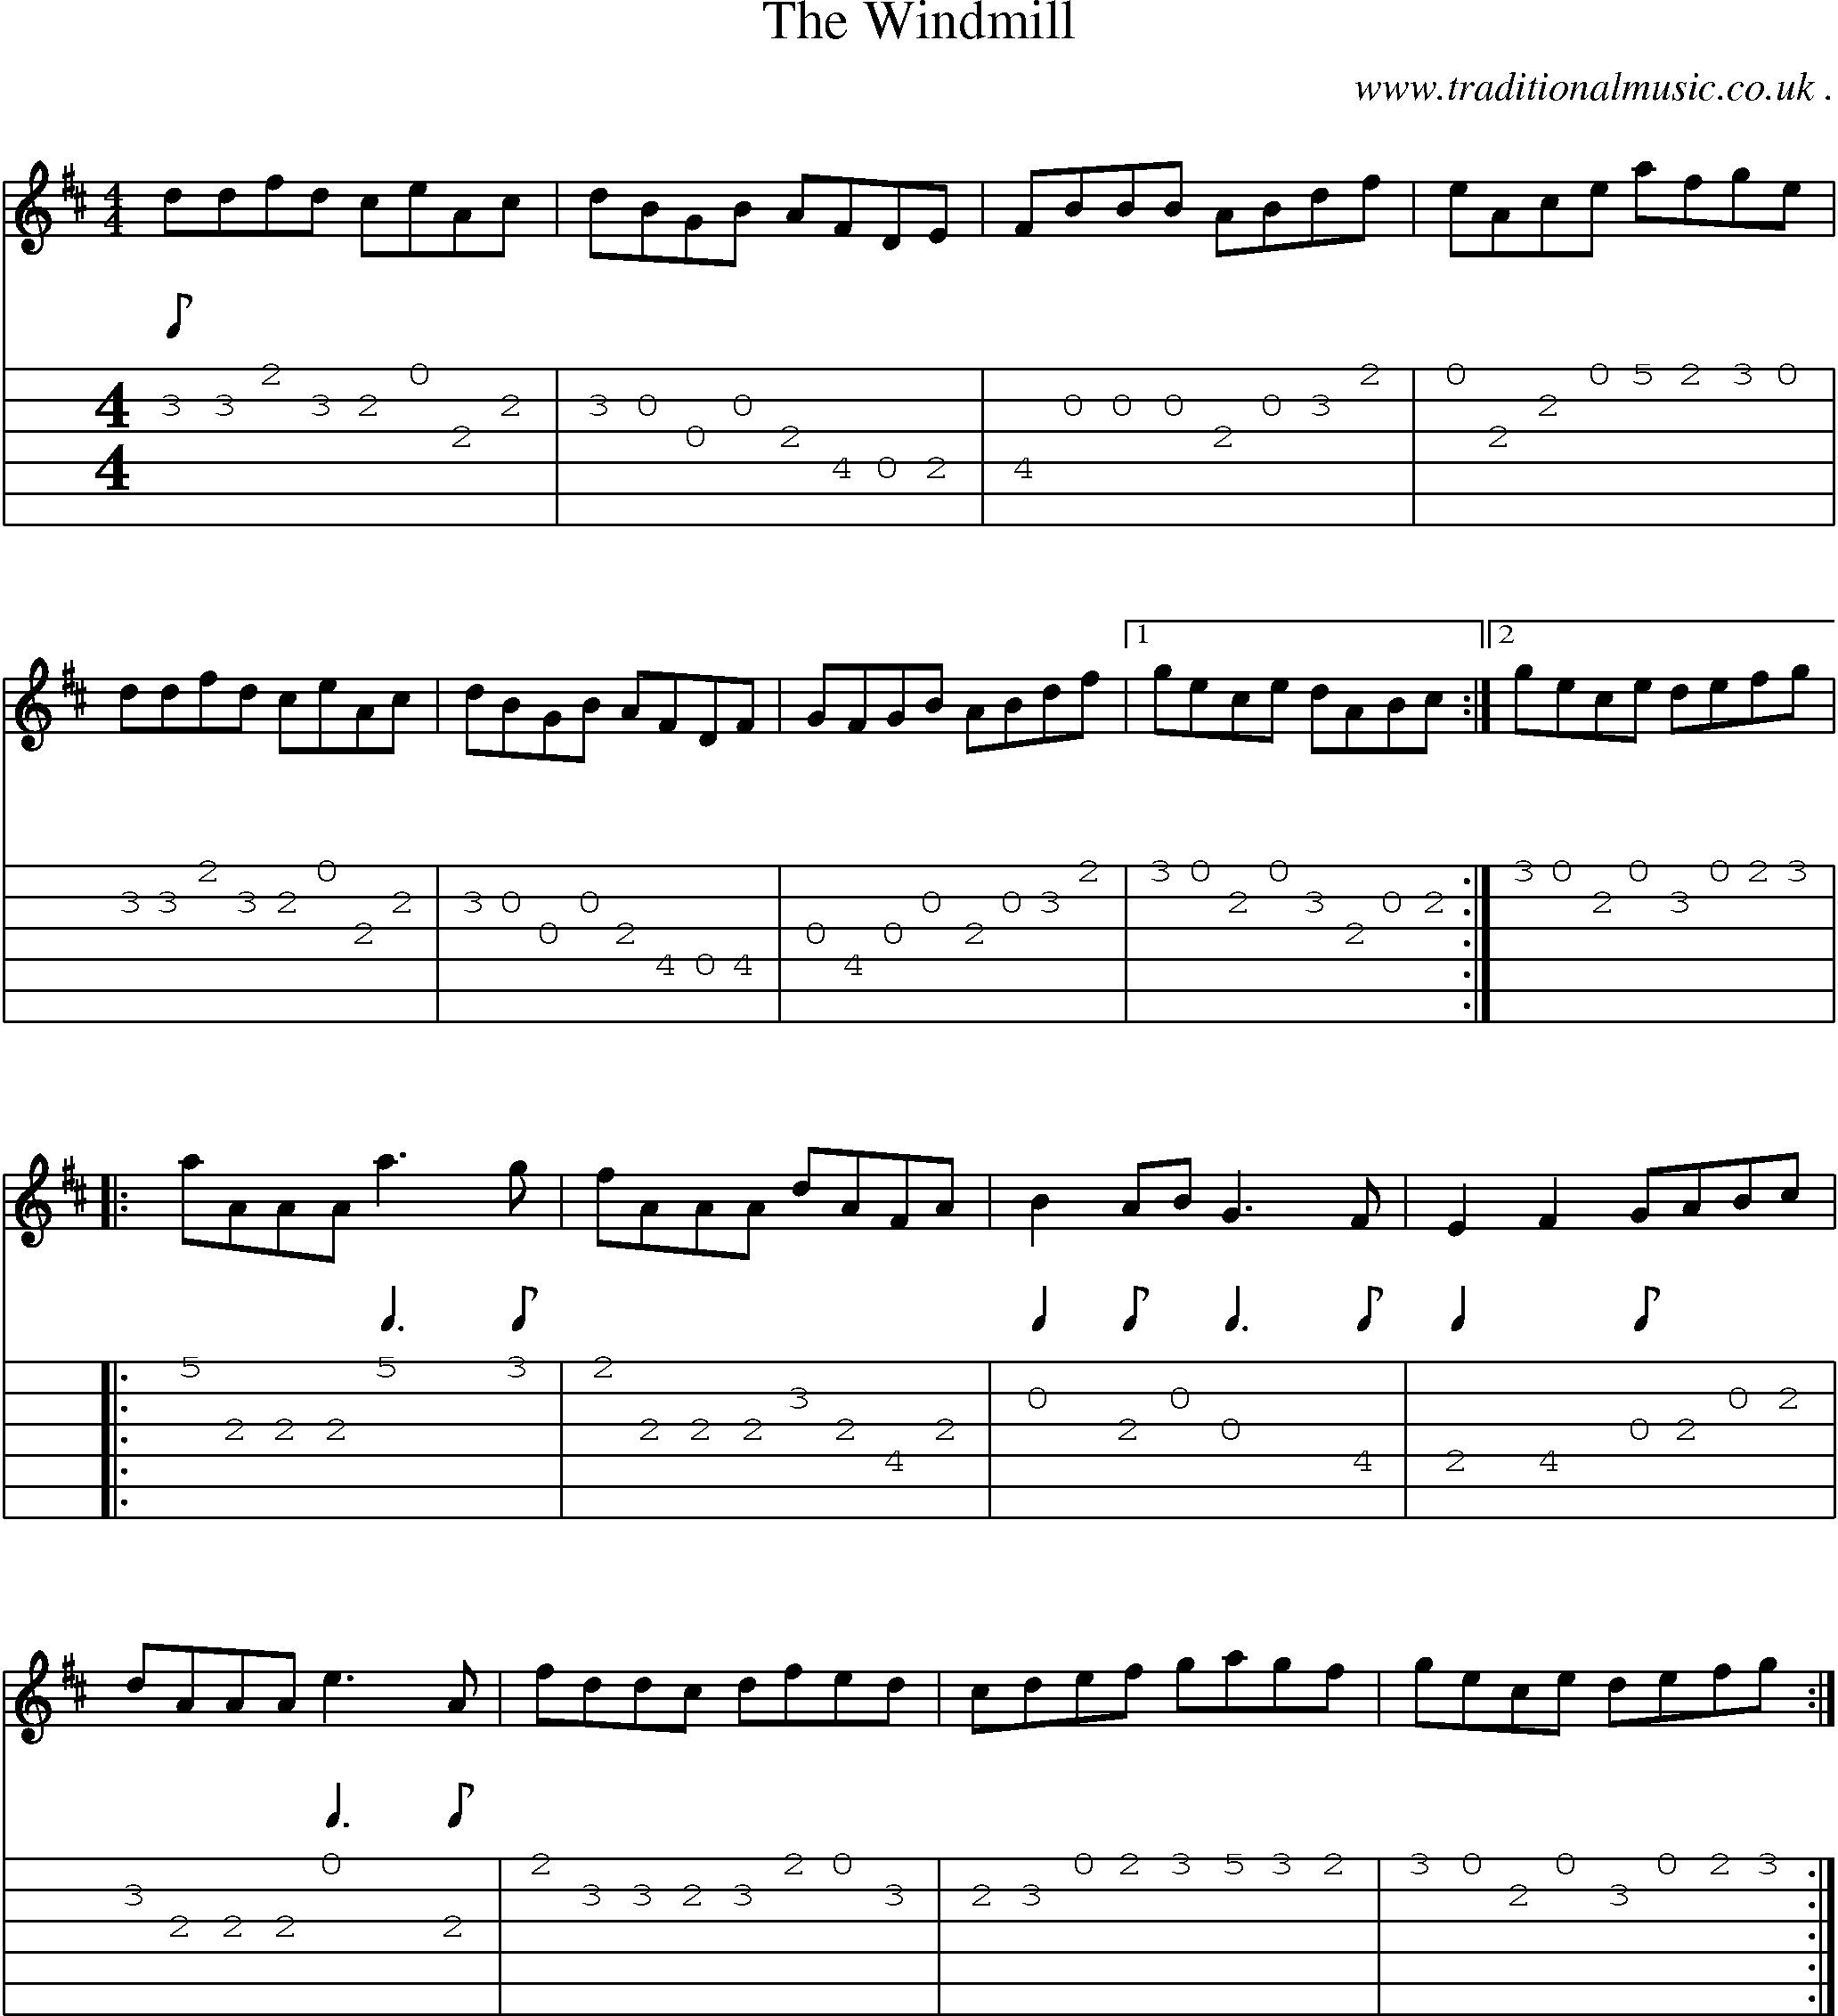 Sheet-Music and Guitar Tabs for The Windmill